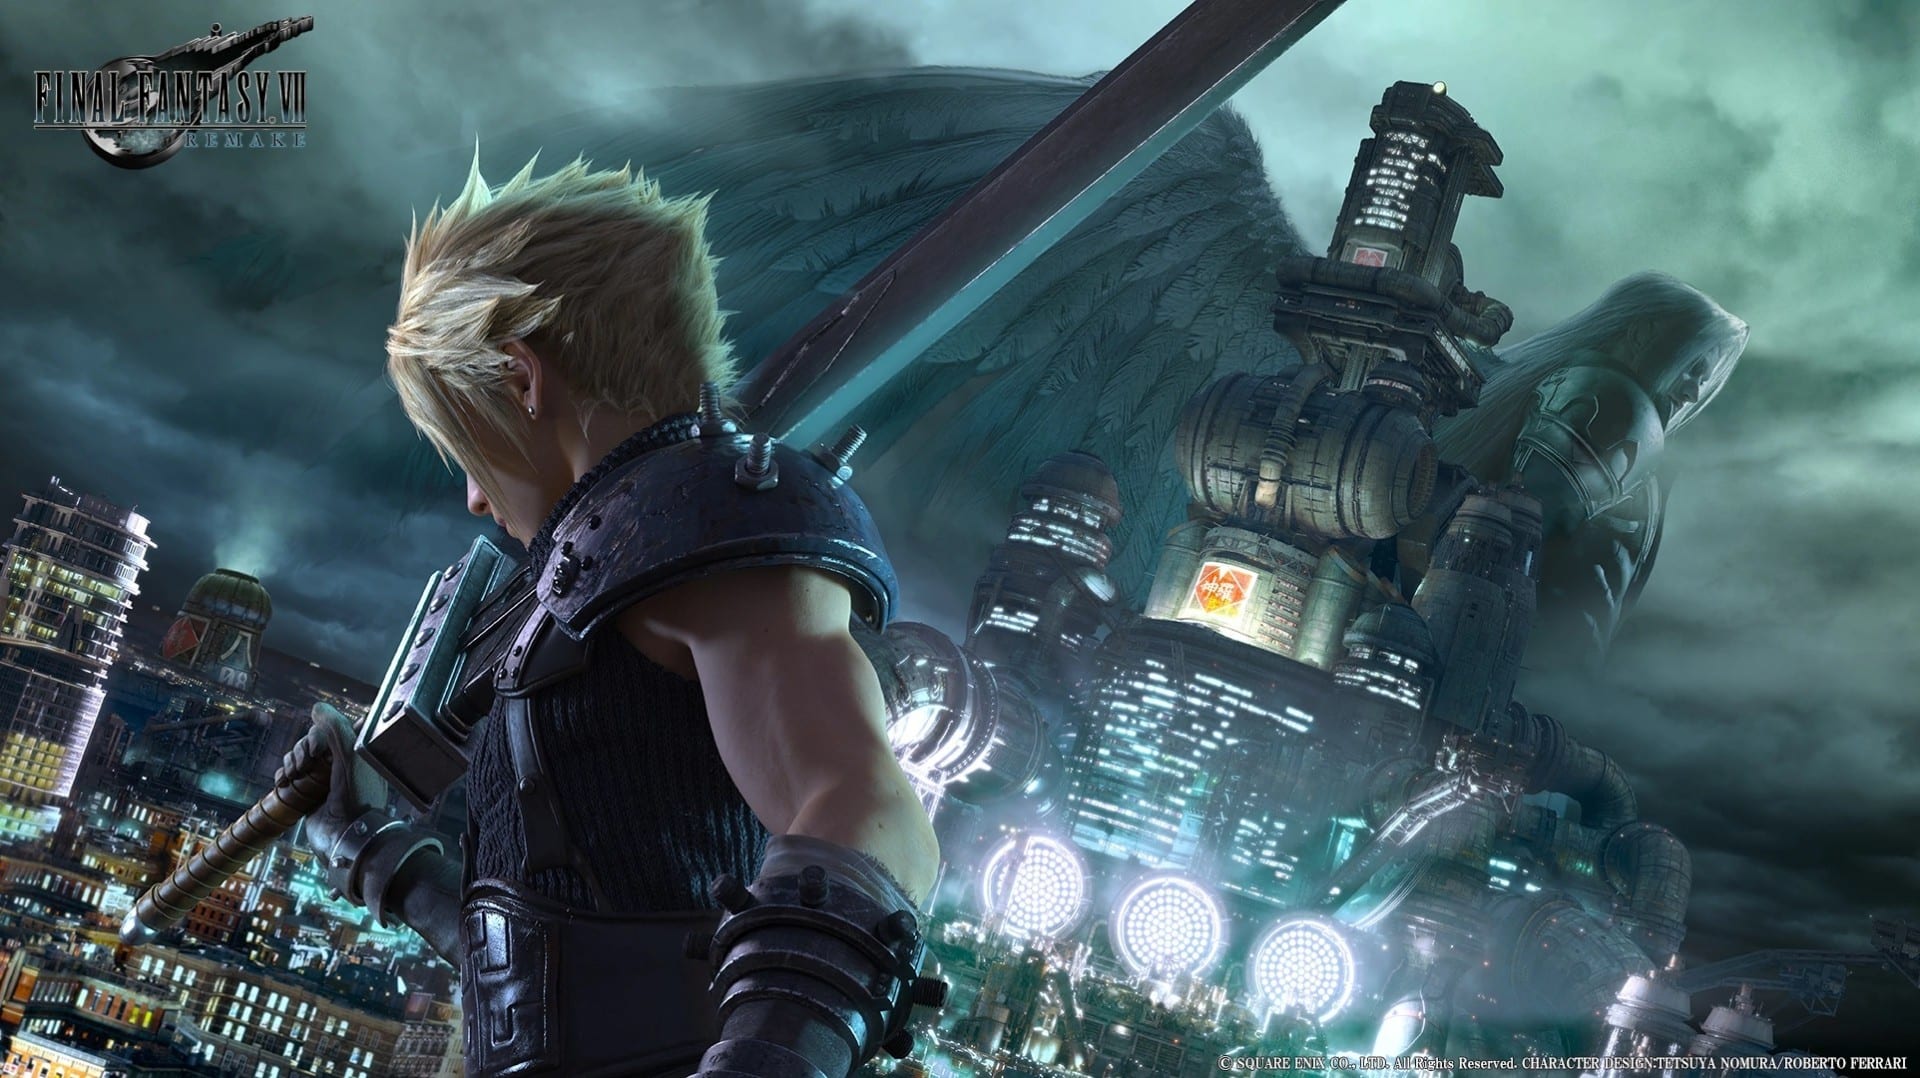 Final Fantasy VII Remake's Combat Is One Key Element Away from Being Great